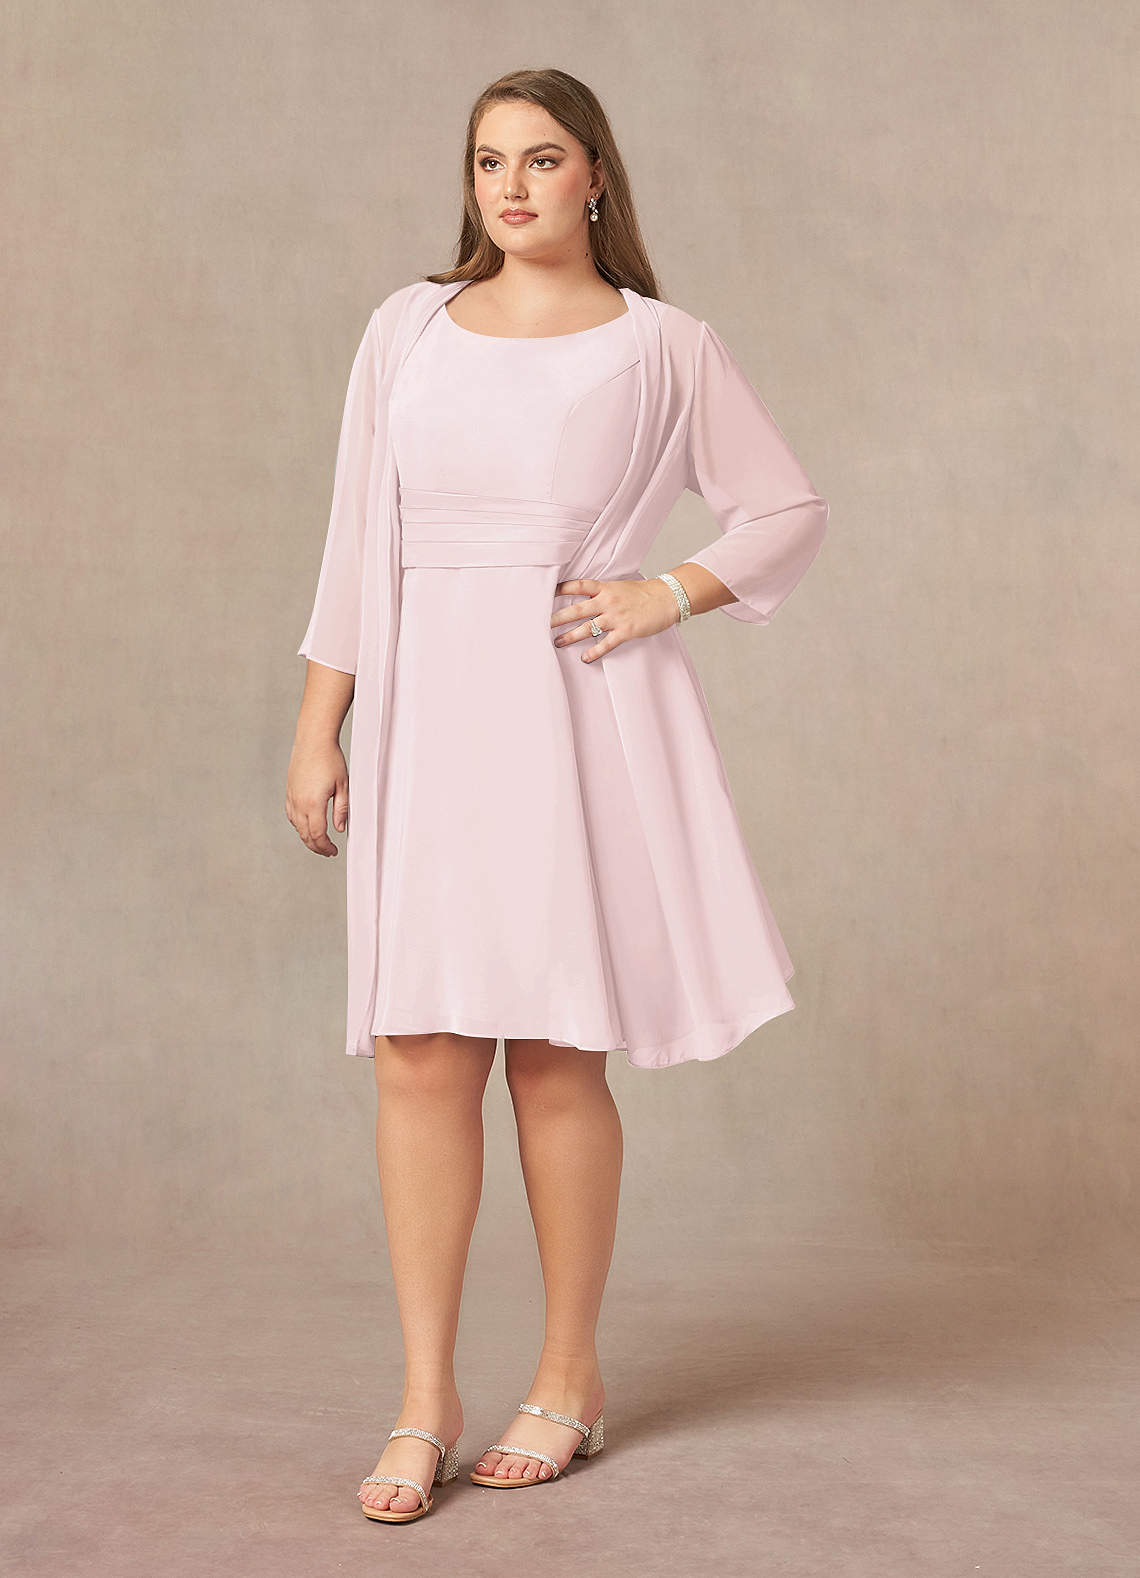 Azazie Shirley Mother of the Bride Dresses A-Line Scoop Pleated Chiffon Knee-Length Dress image1